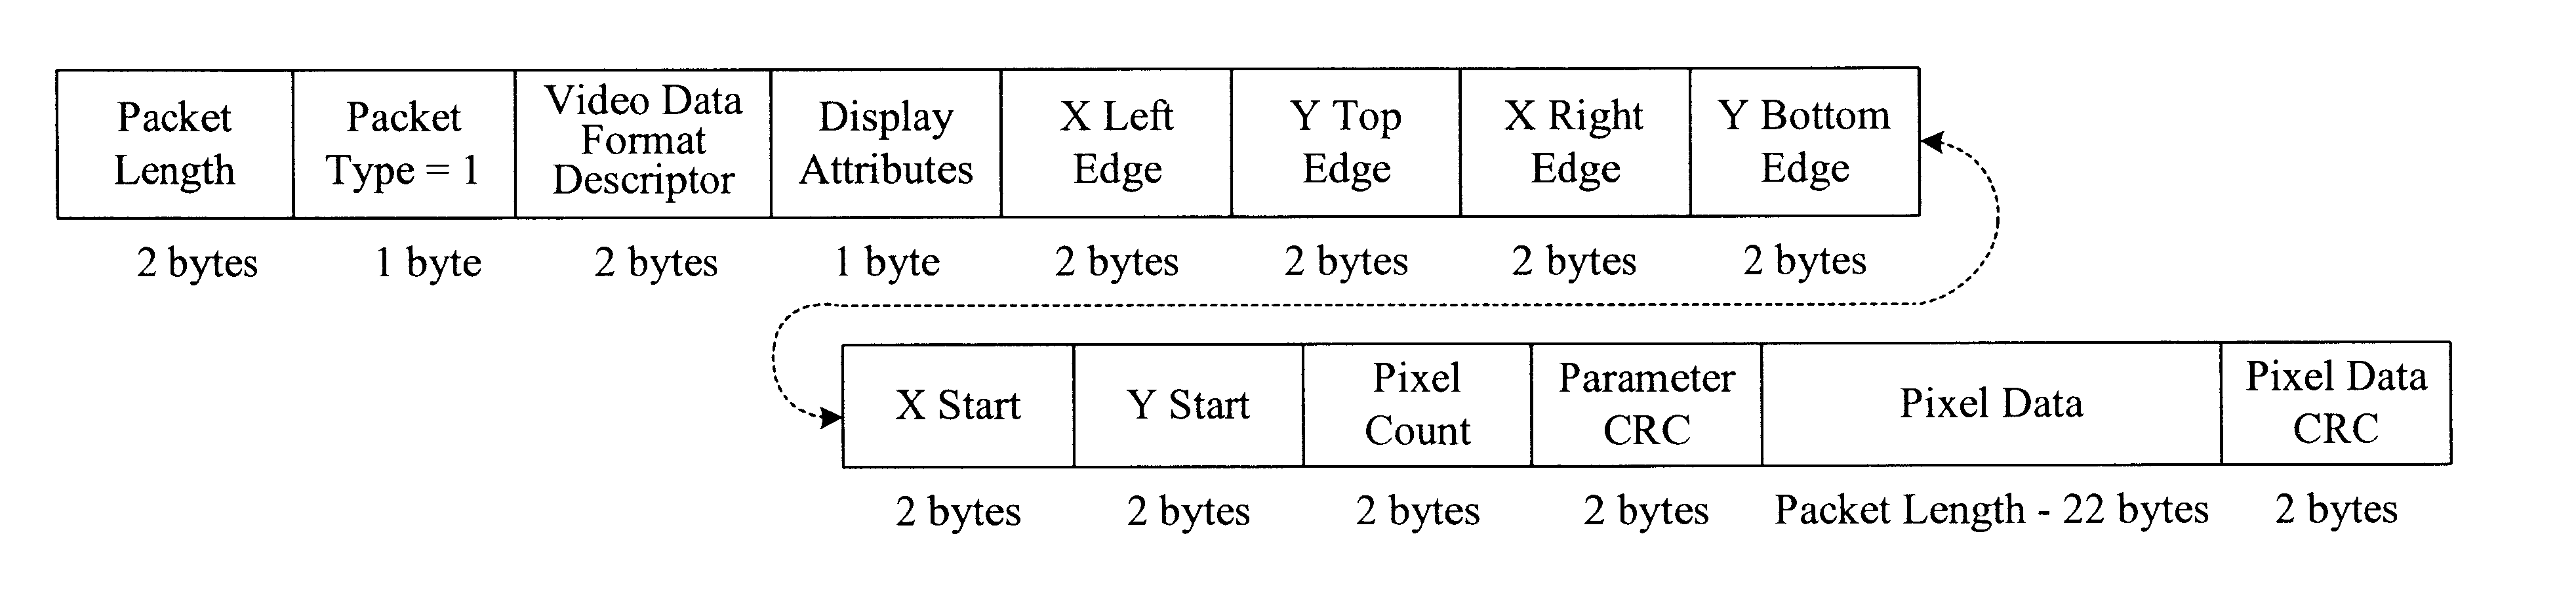 Generating and implementing a communication protocol and interface for high data rate signal transfer